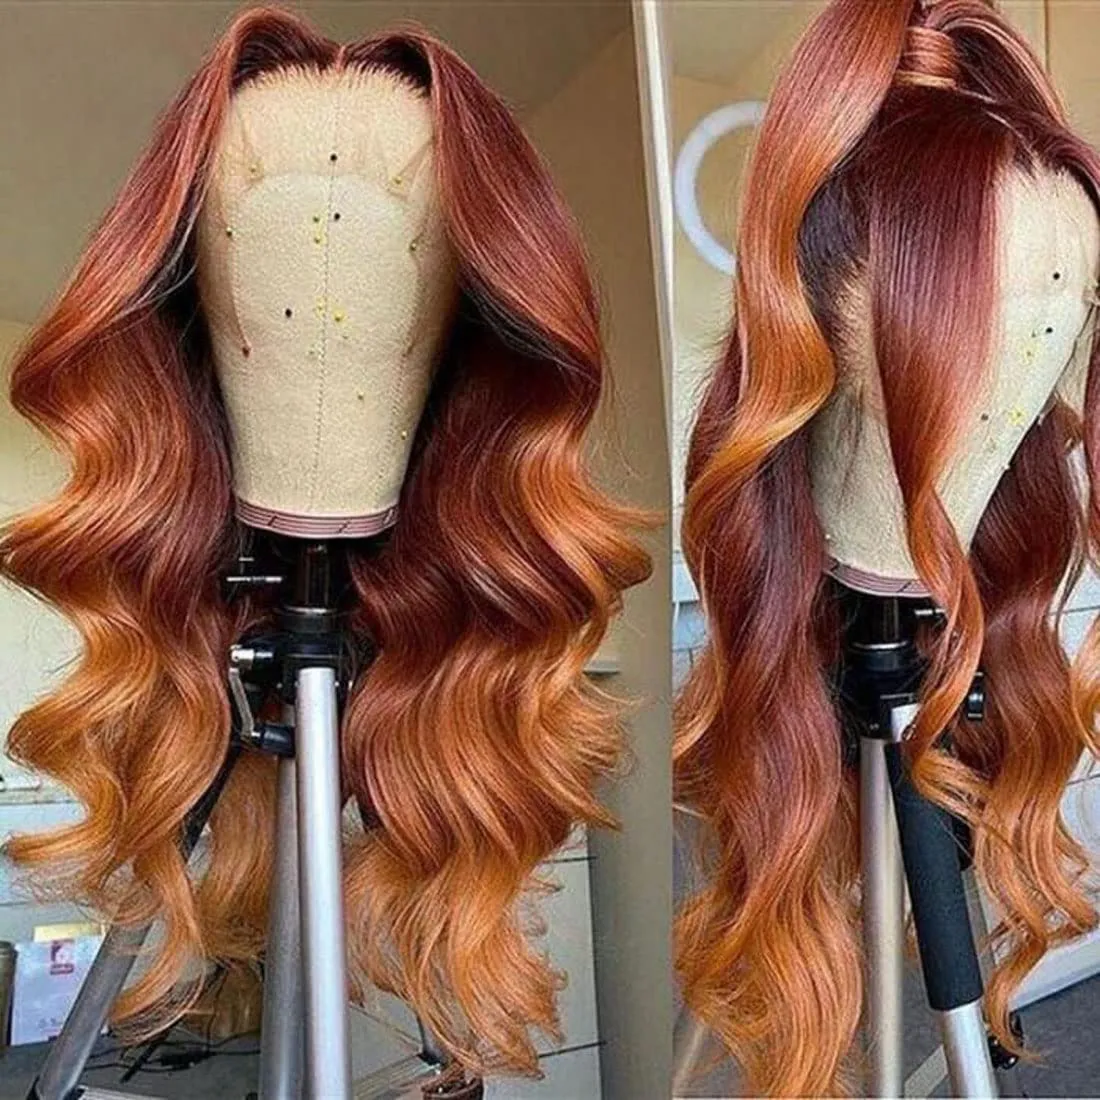 Highlight Ginger Orange HD Transparent Lace Front Wigs Human Hair Pre Plucked with Baby Hair Brazilian Remy Straight Frontal Wig Piano Color 150% Density diva1